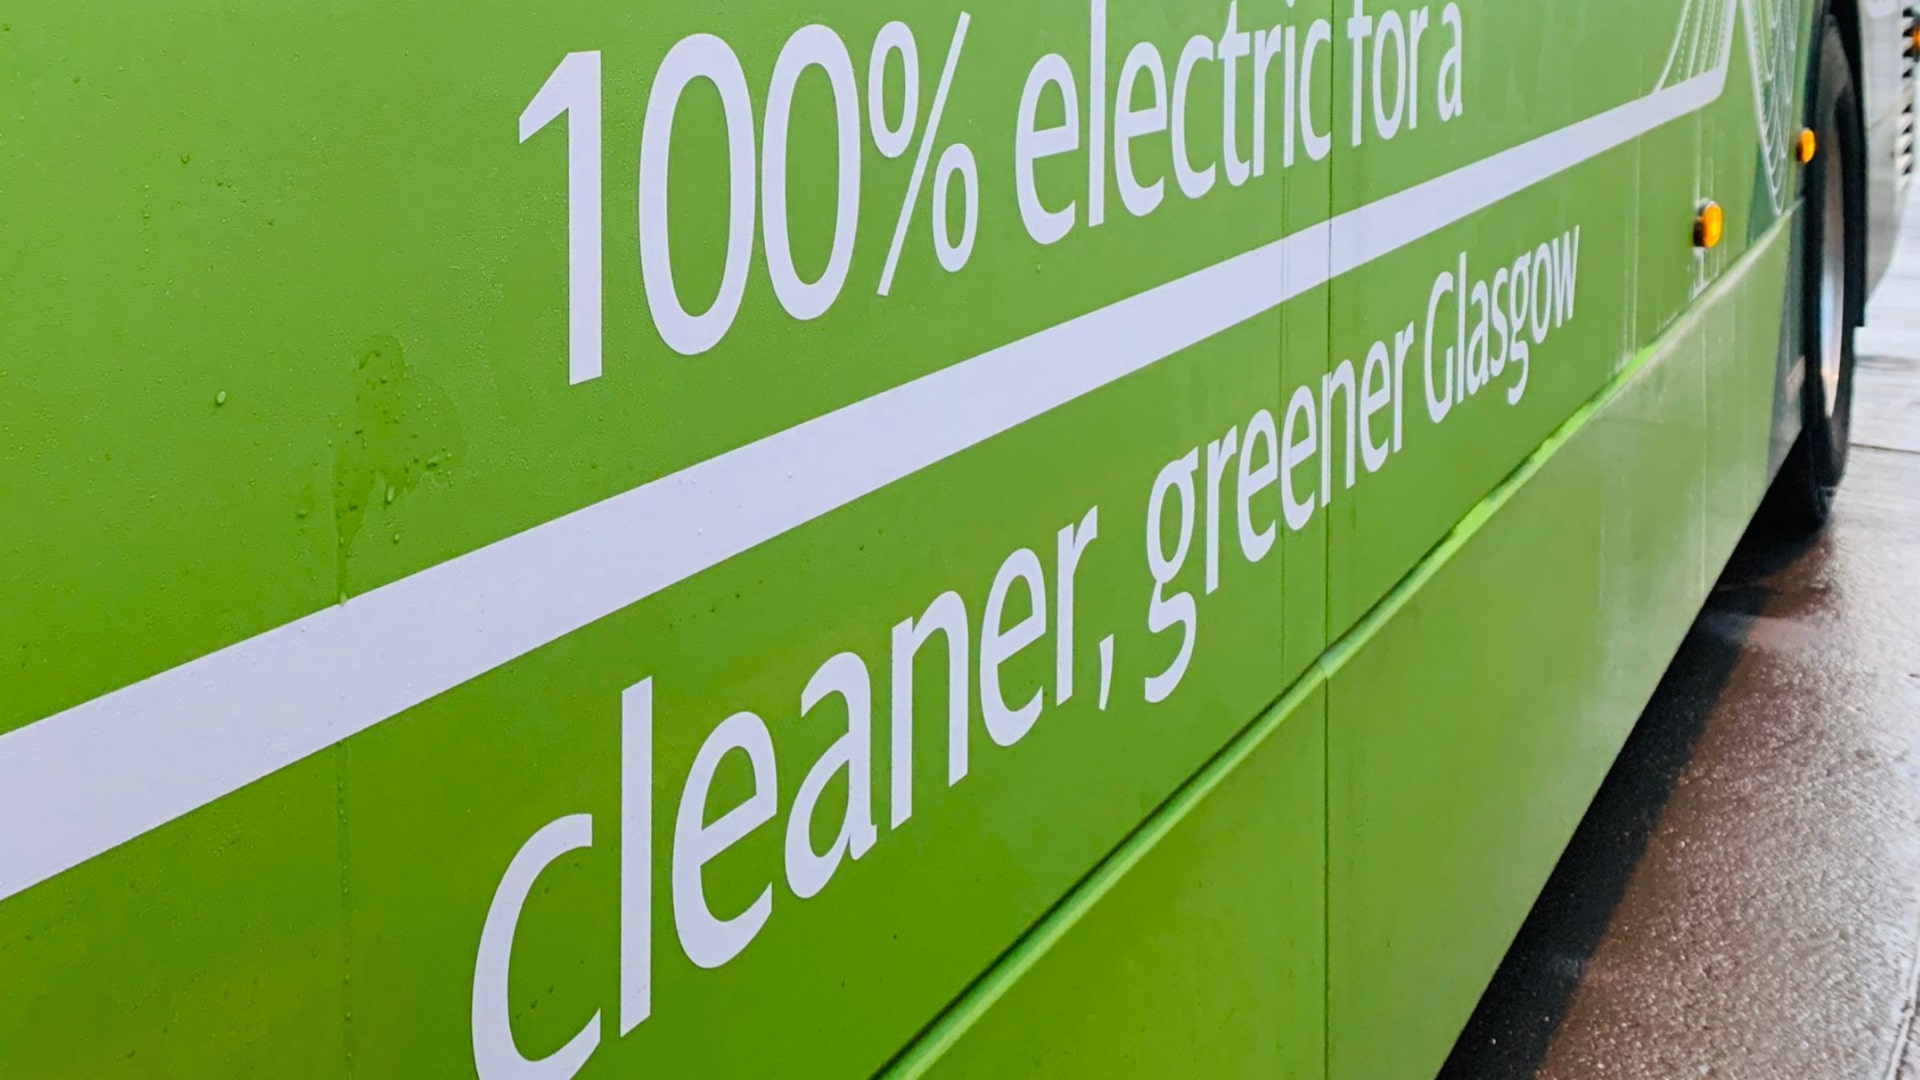 Electric buses coming to Glasgow